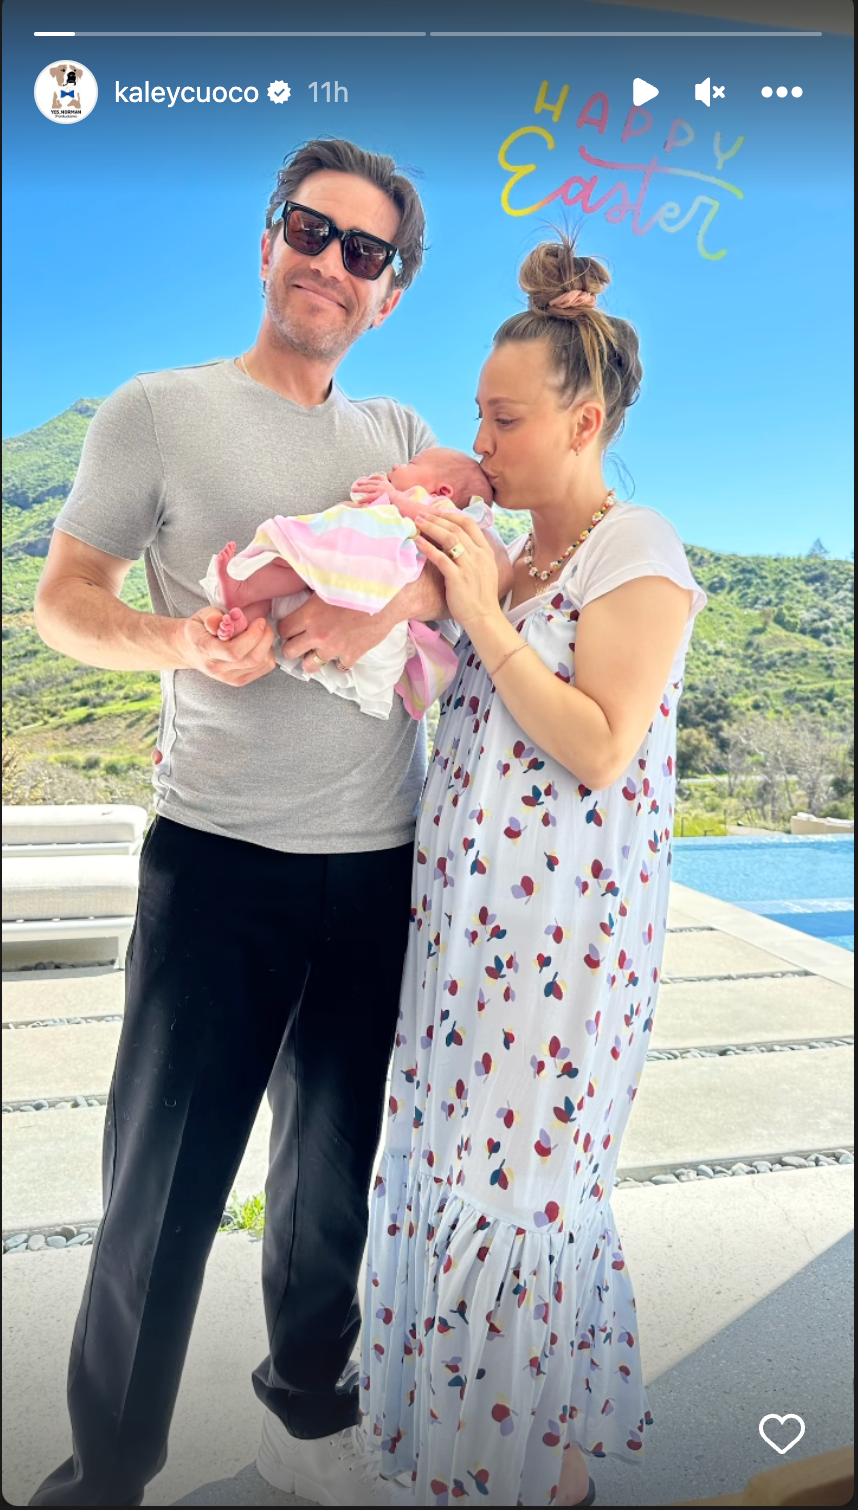 Kaley Cuoco and Tom Pelphrey celebrate Daughter's first Easter